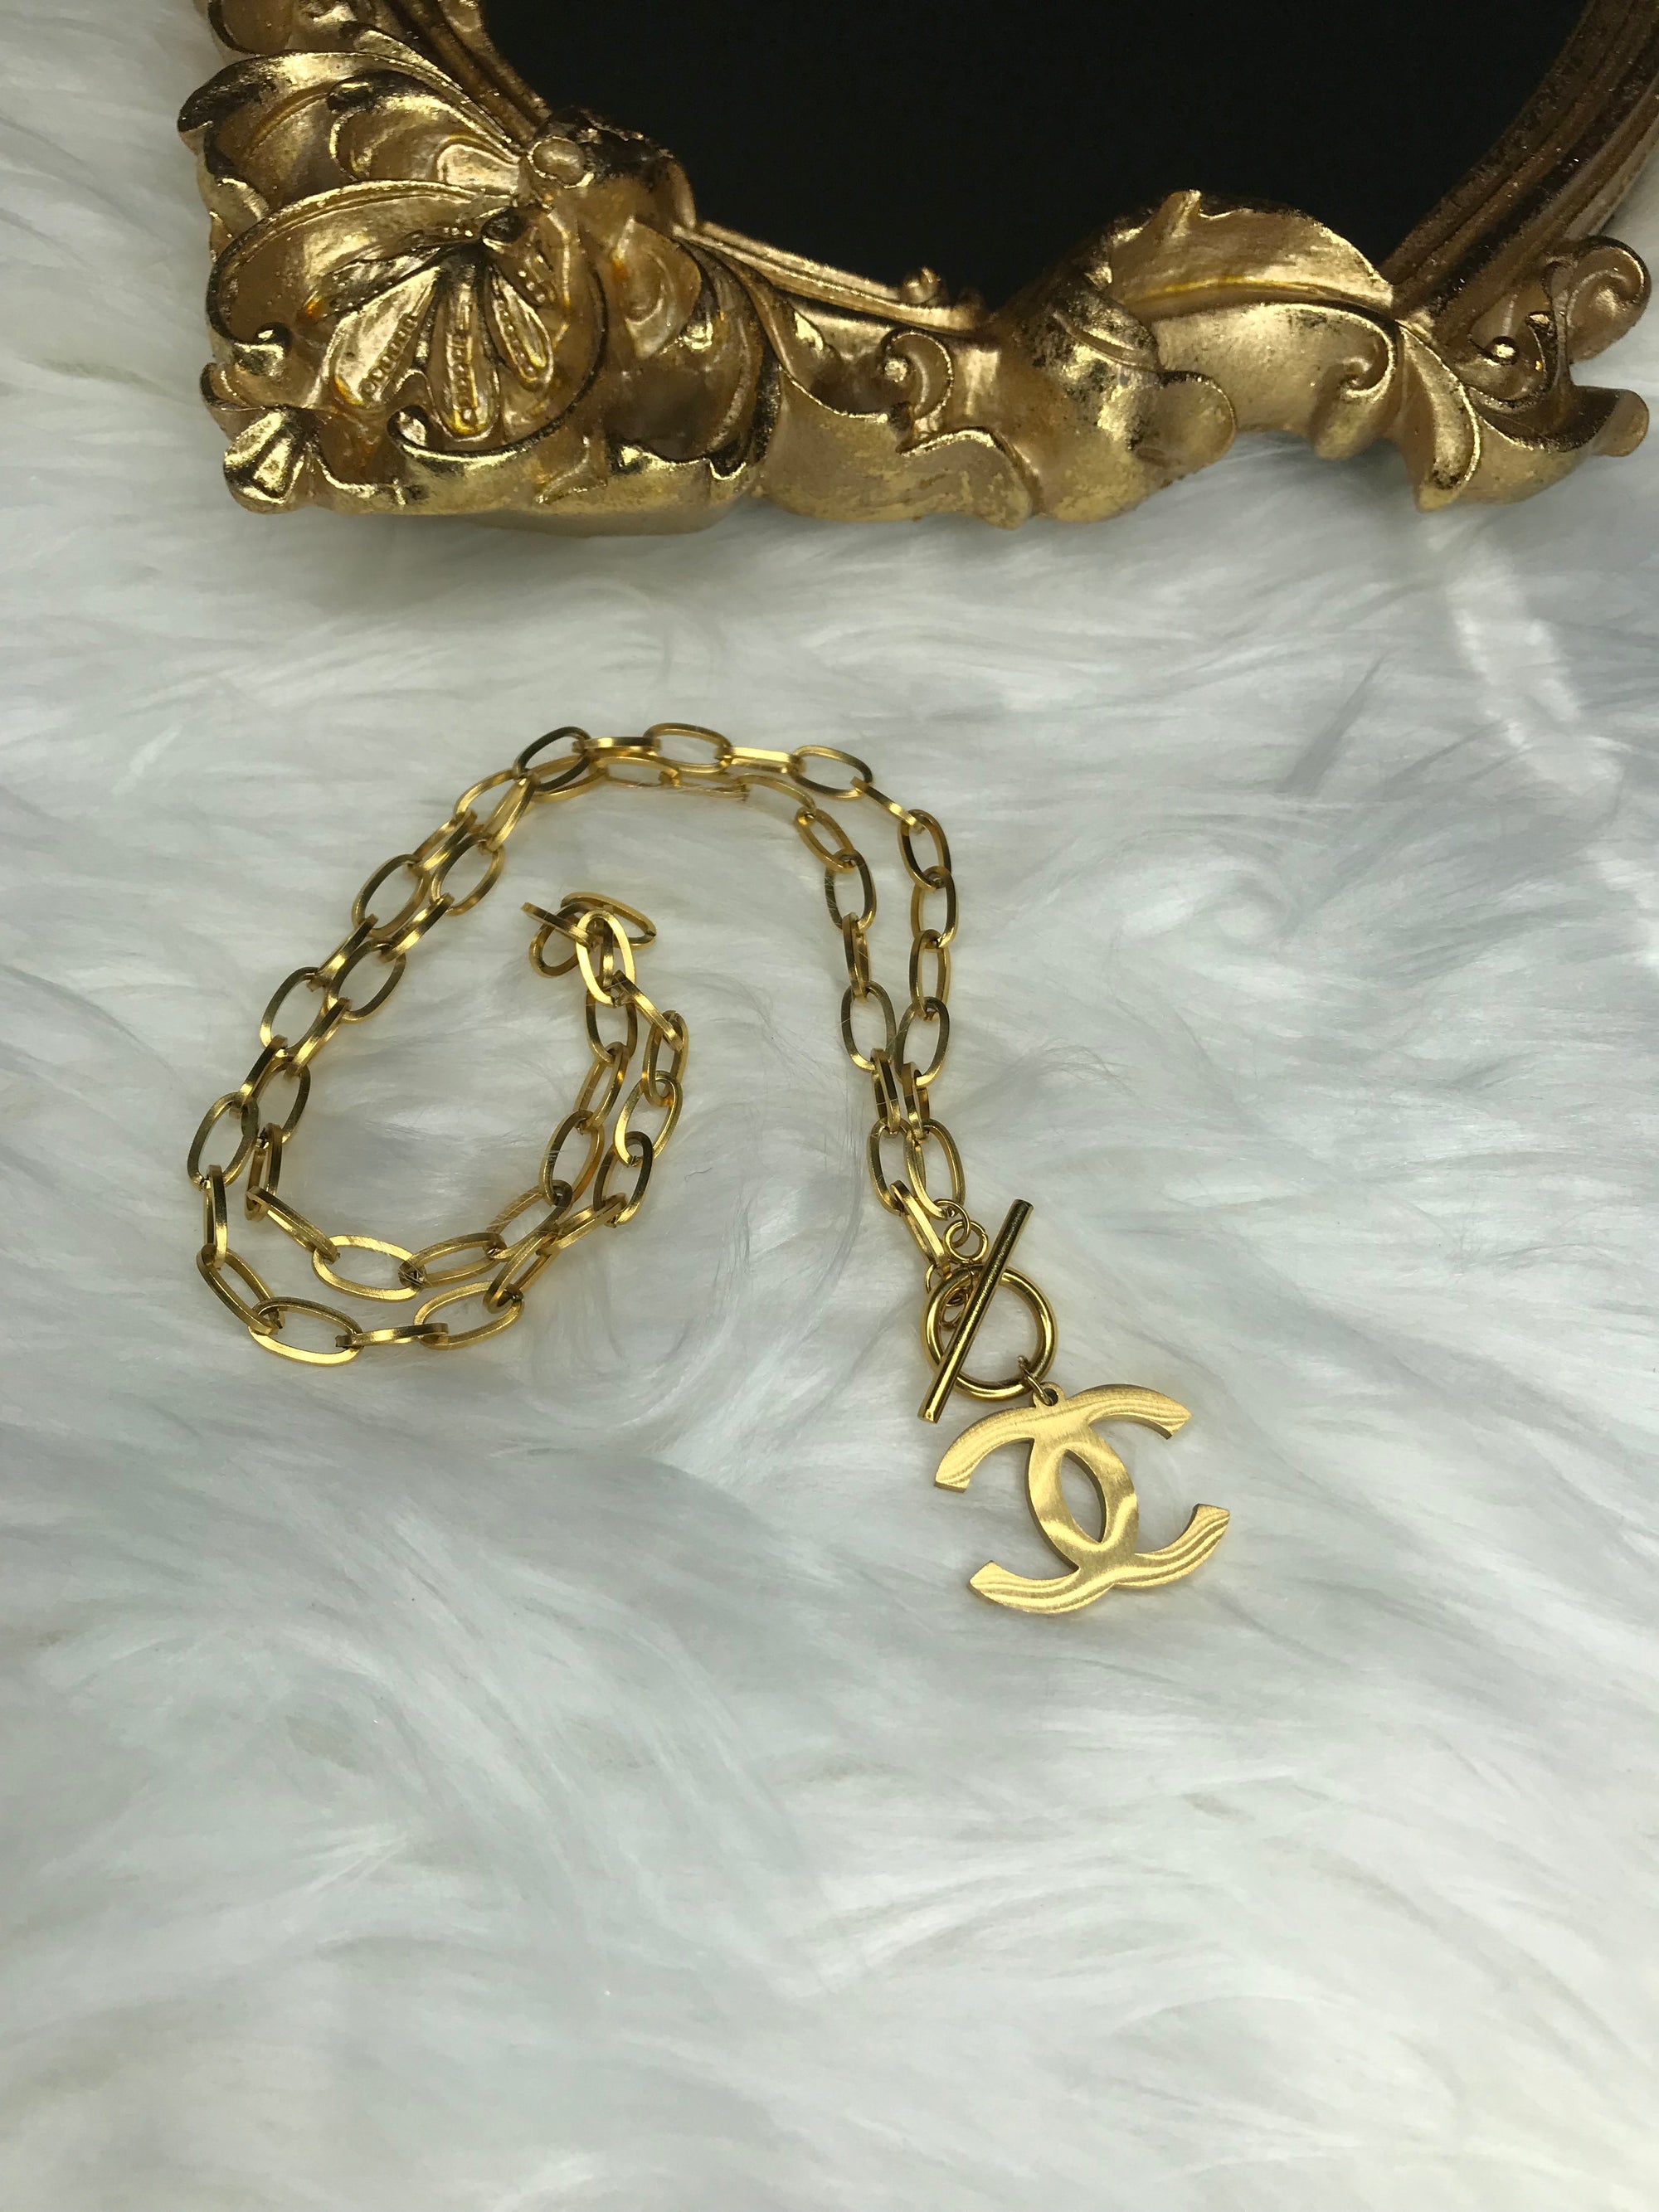 CHANEL, Jewelry, Chanel Charms